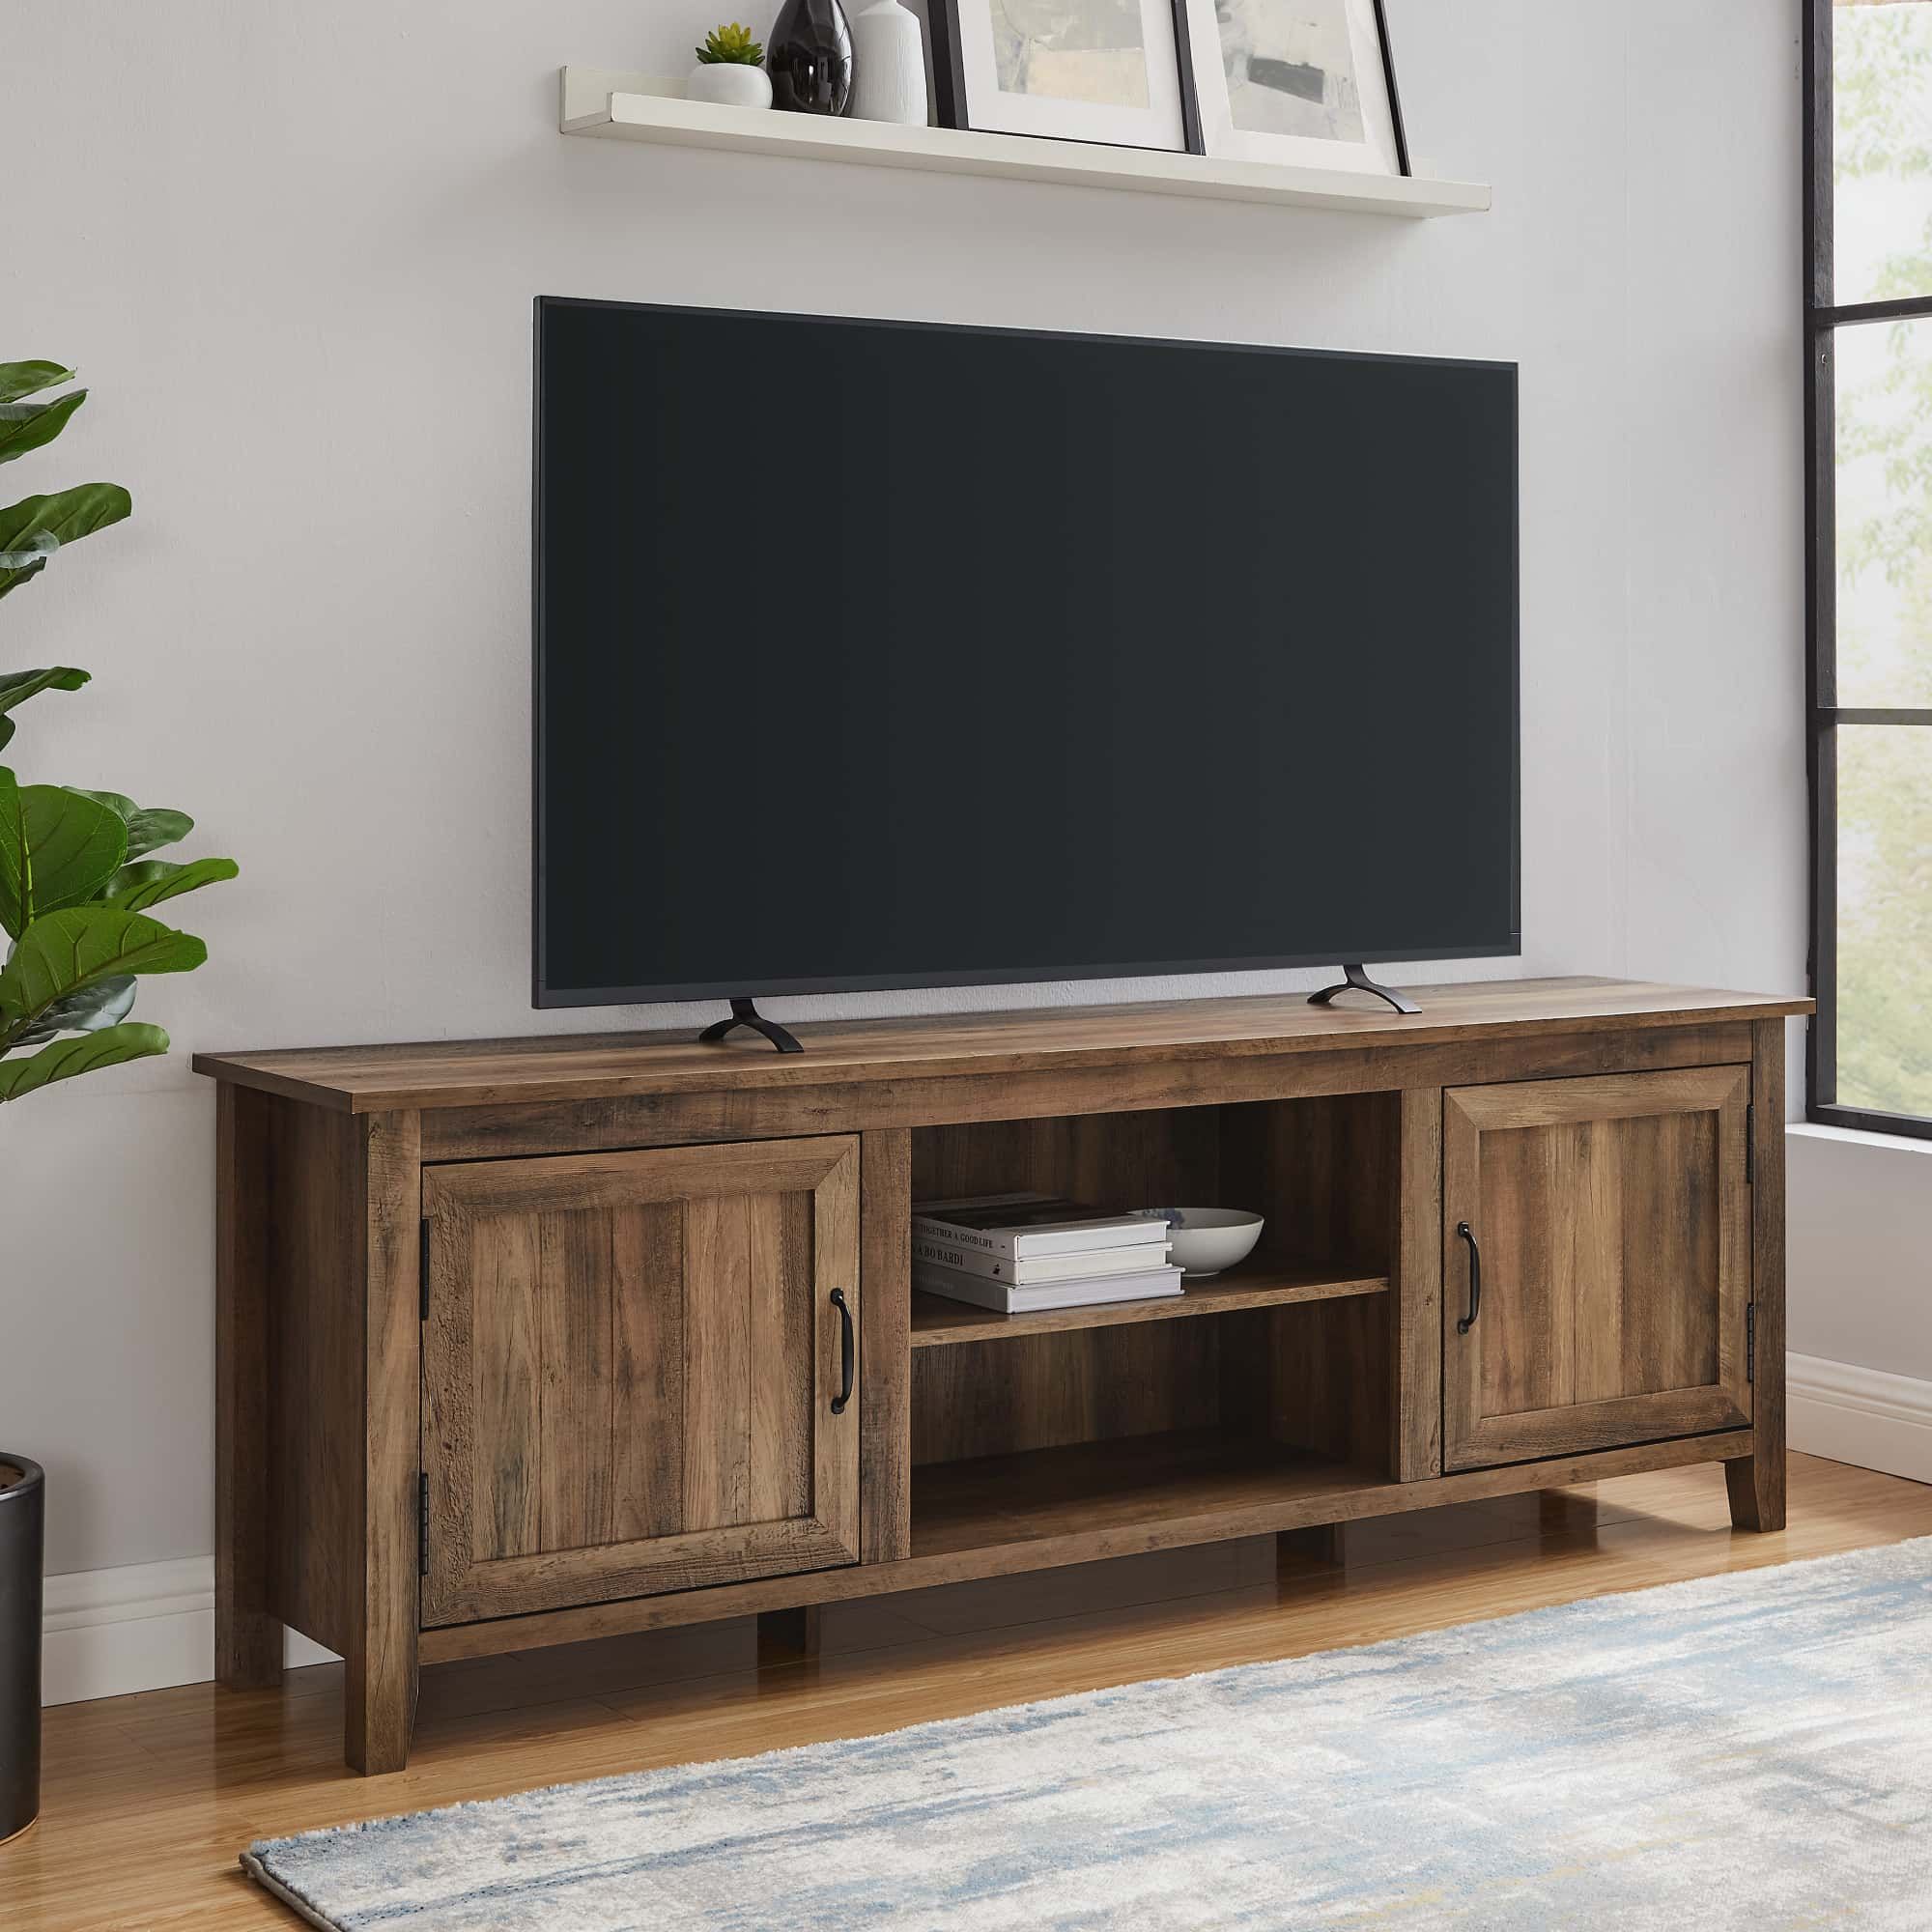 70 Inch Modern Farmhouse Wood Tv Stand – Rustic Oakwalker Edison With Modern Farmhouse Rustic Tv Stands (View 9 of 15)